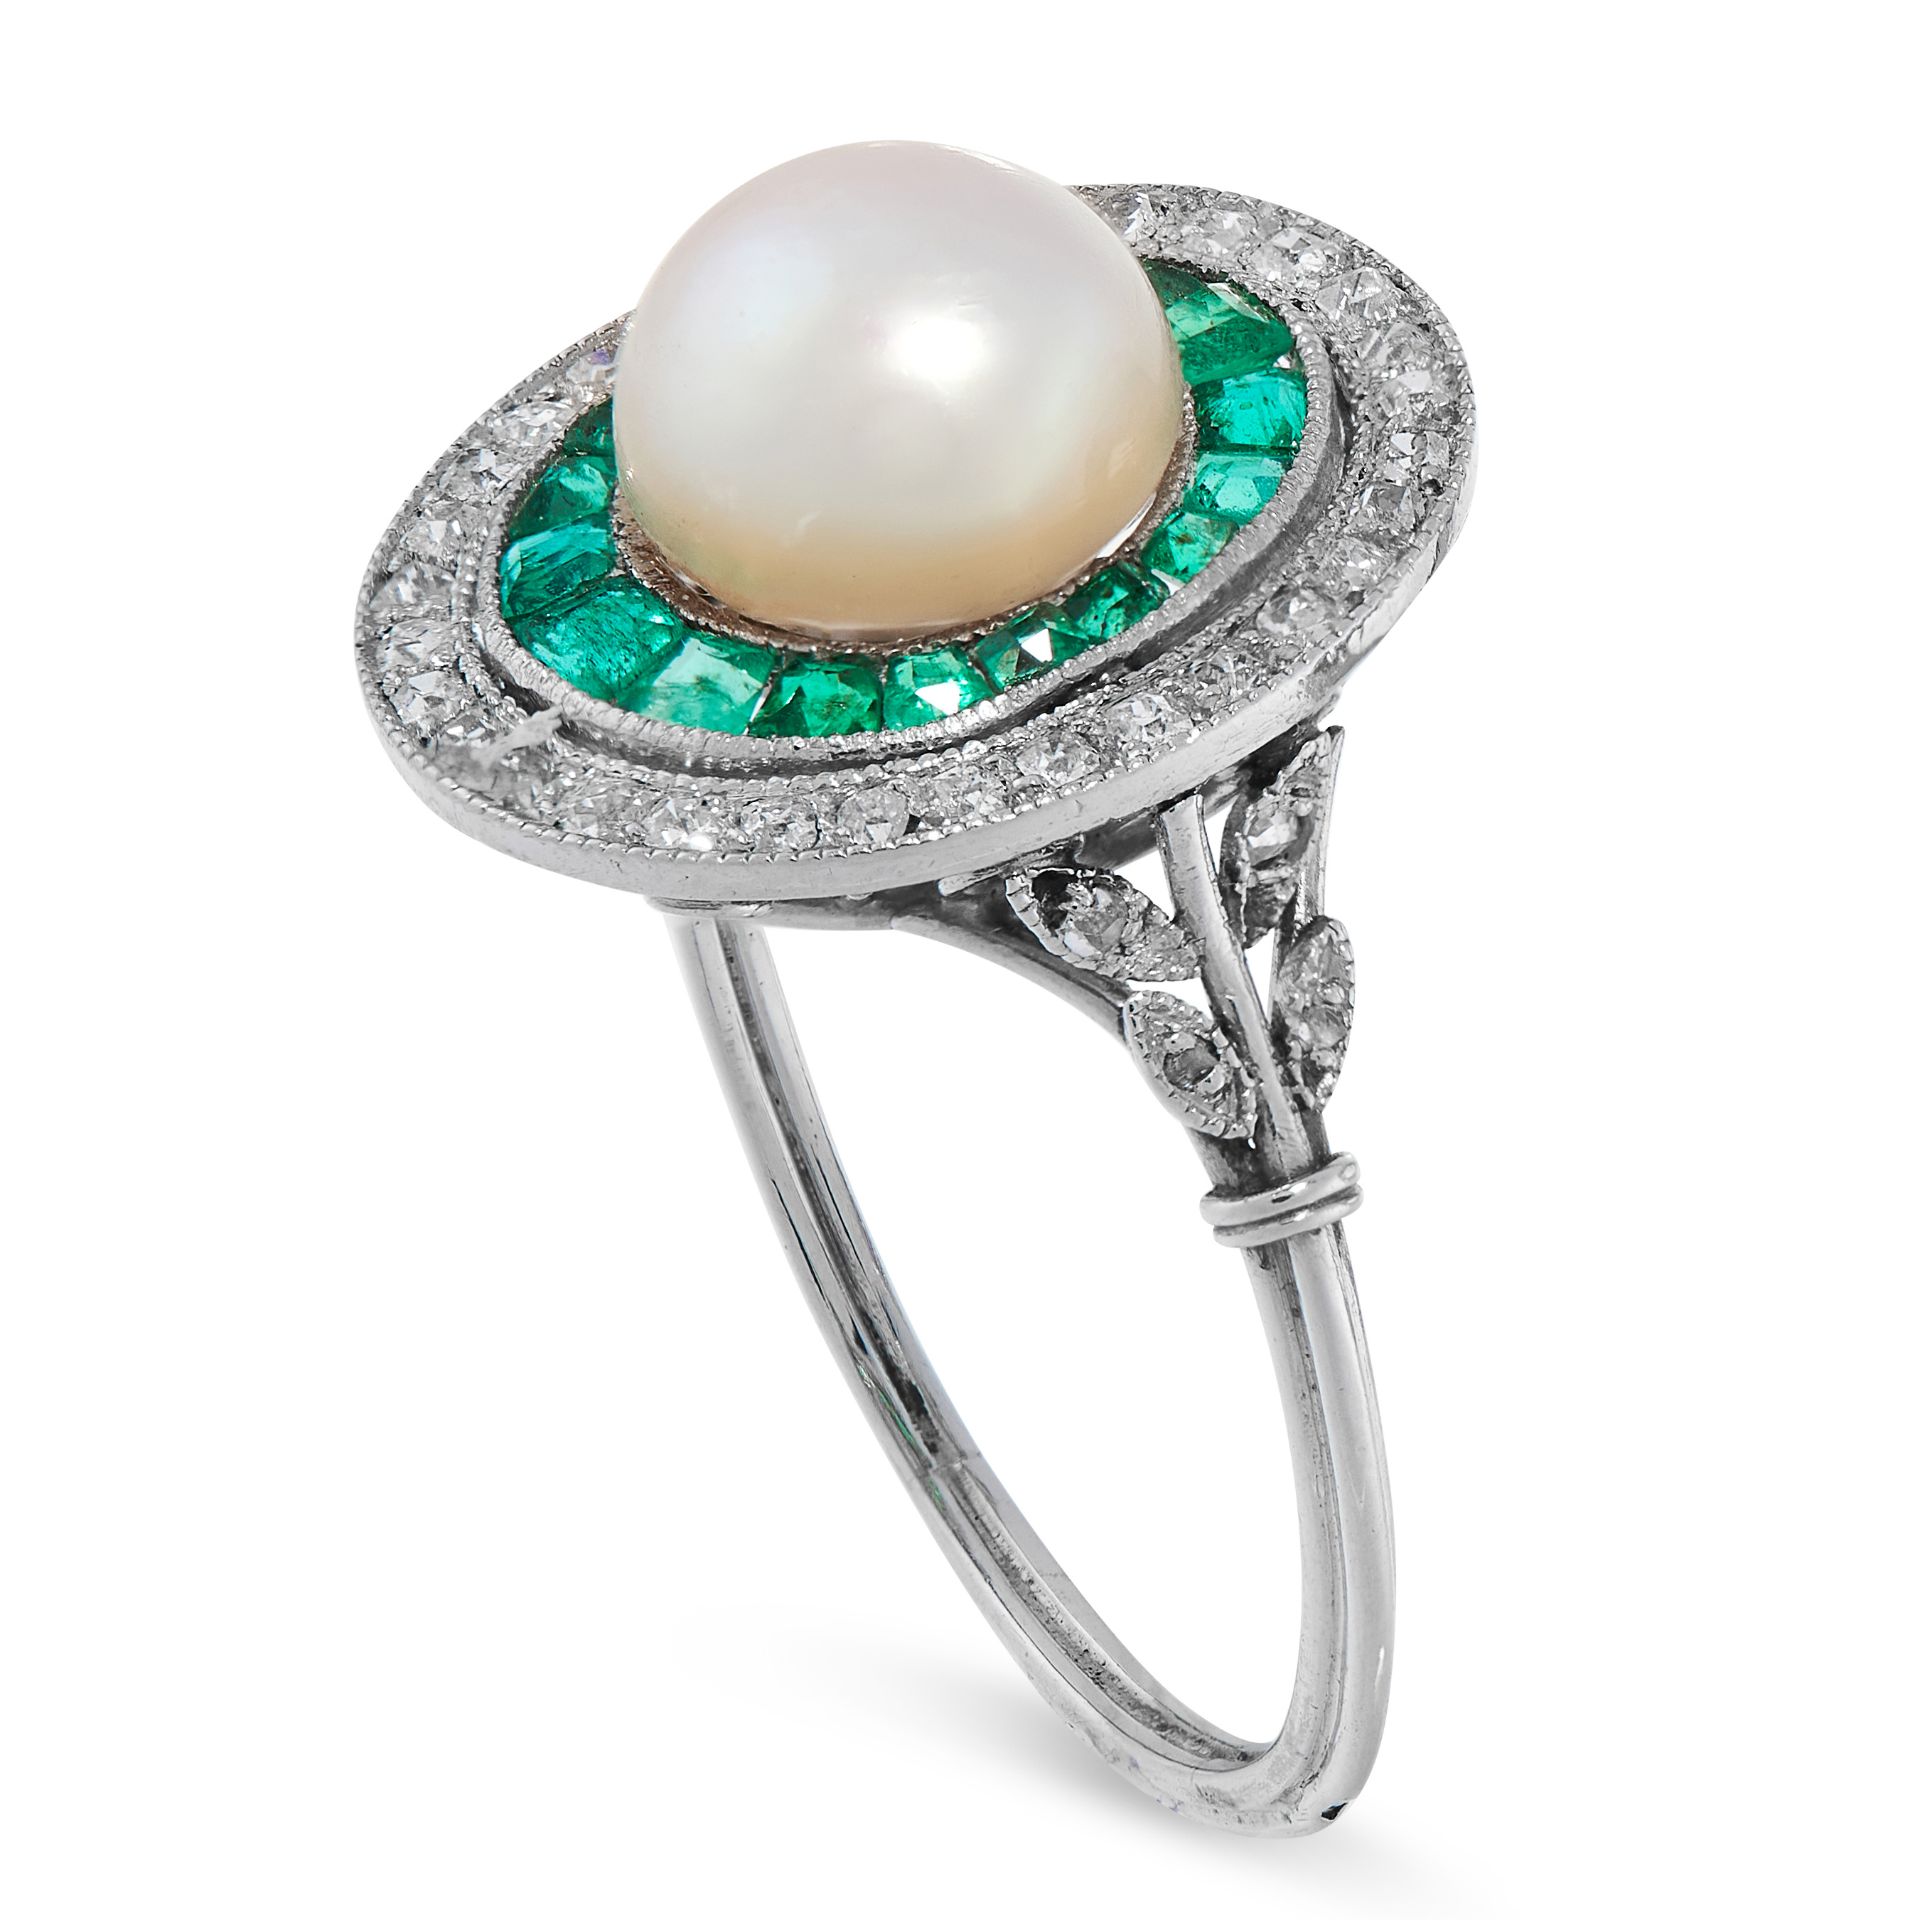 AN ART DECO NATURAL PEARL, EMERALD AND DIAMOND RING, CIRCA 1925 in platinum, in target design, set - Image 2 of 2